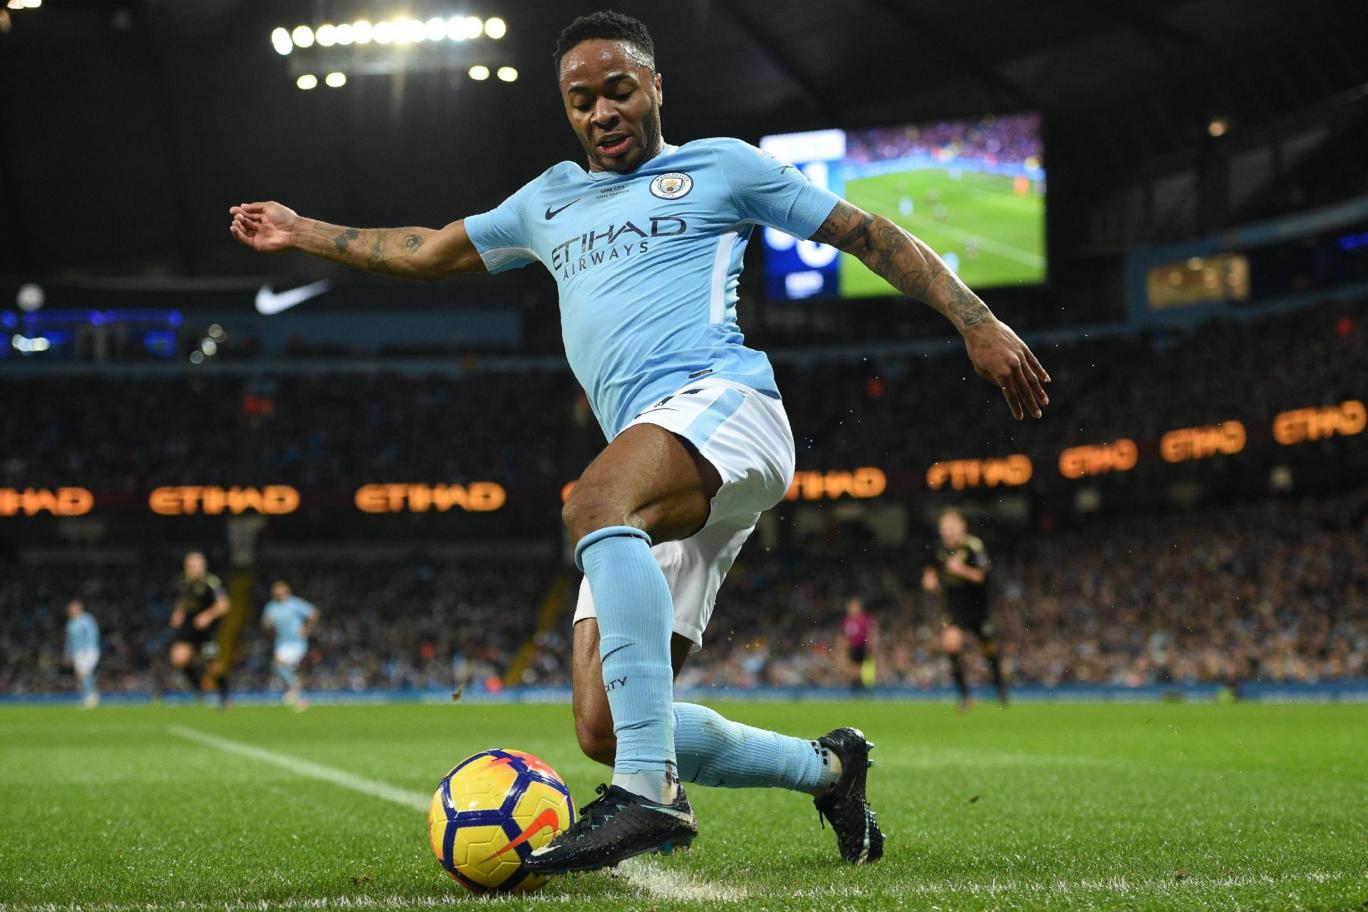 Raheem Sterling in action for Manchester City. (Getty Images)